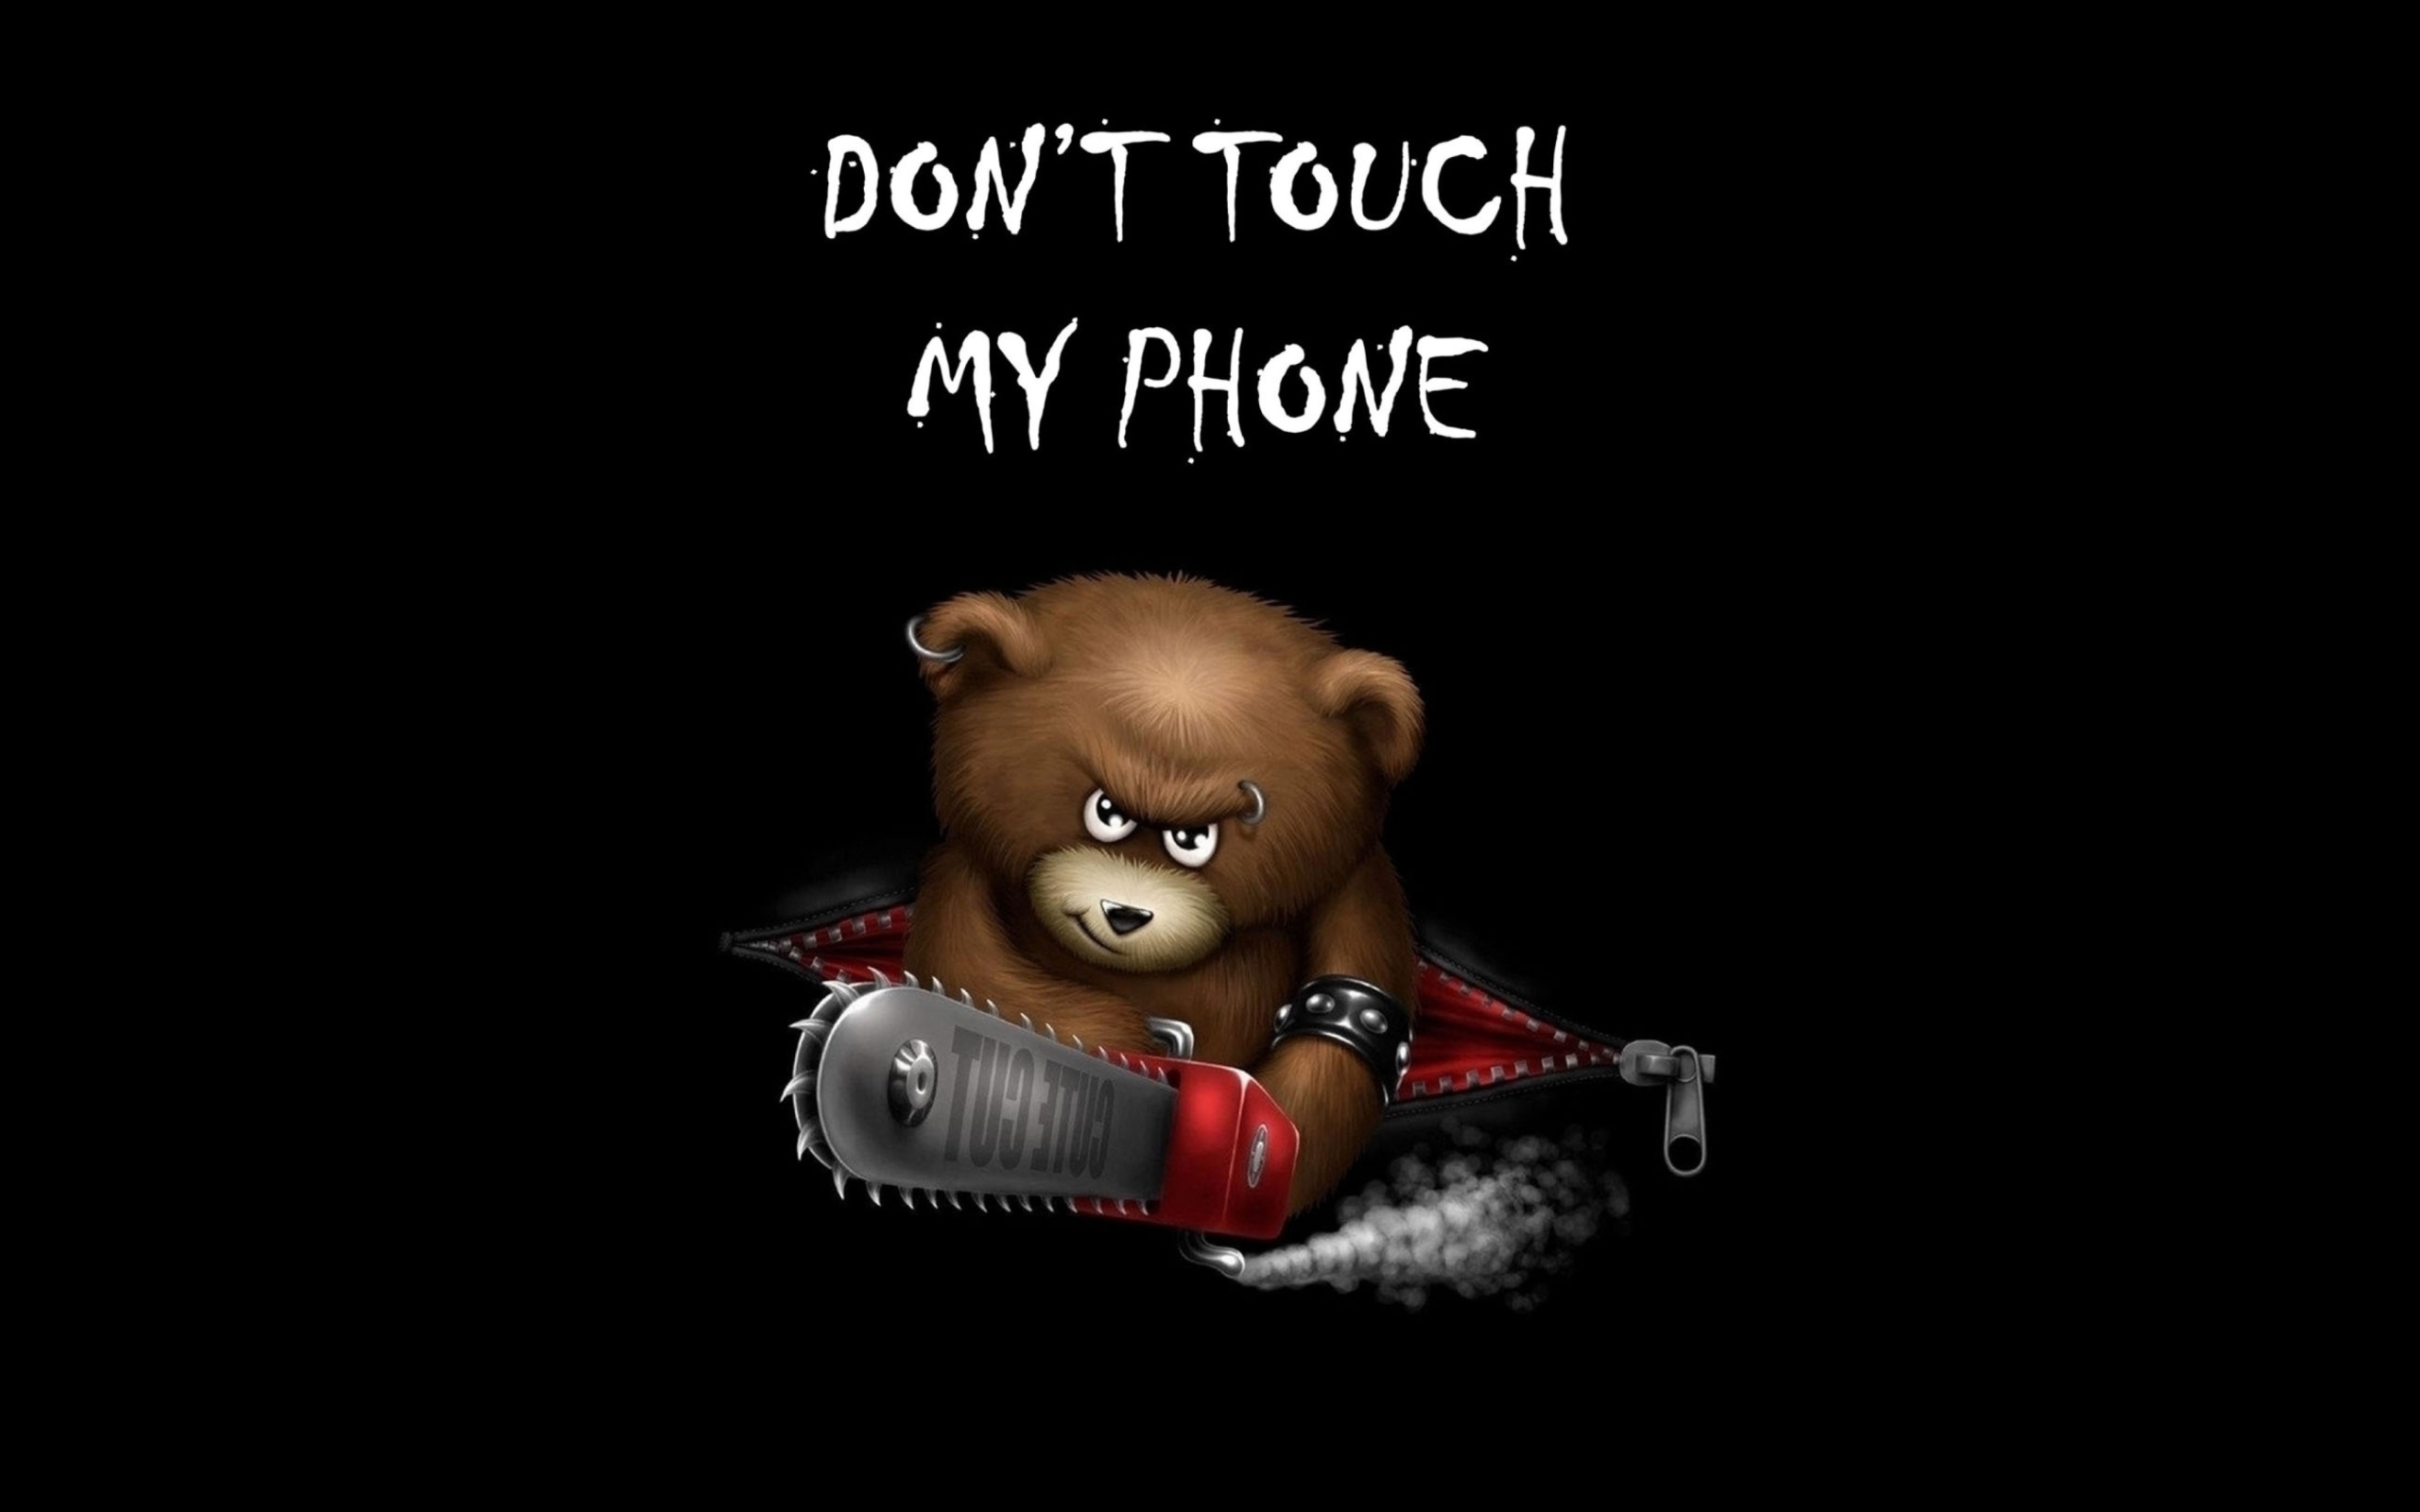 Dont Touch My Phone wallpaper 2560x1600